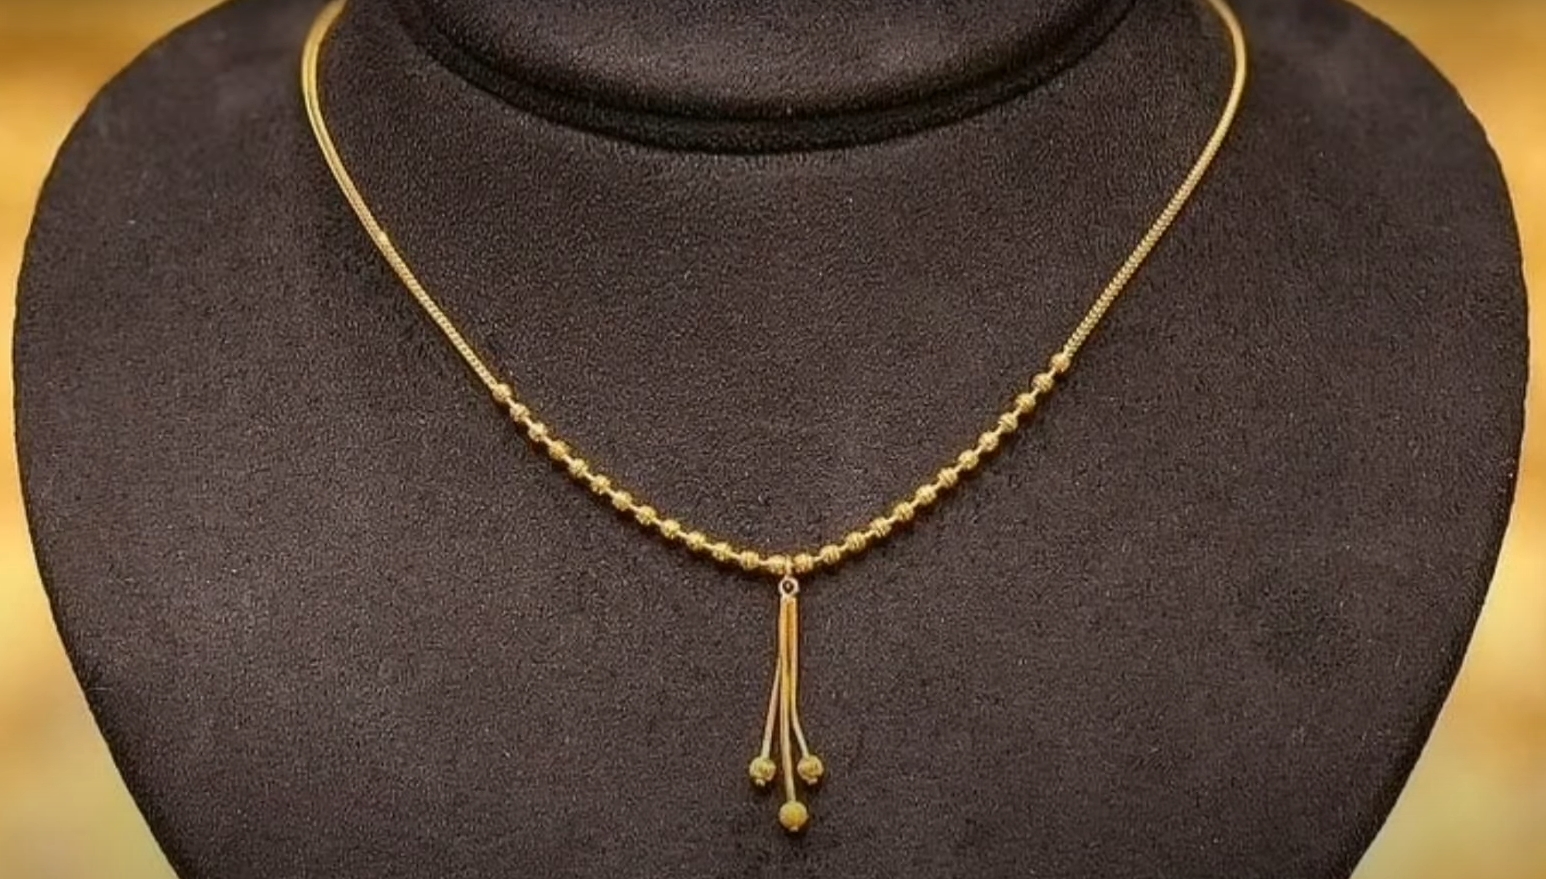 How to Measure a Necklace Length